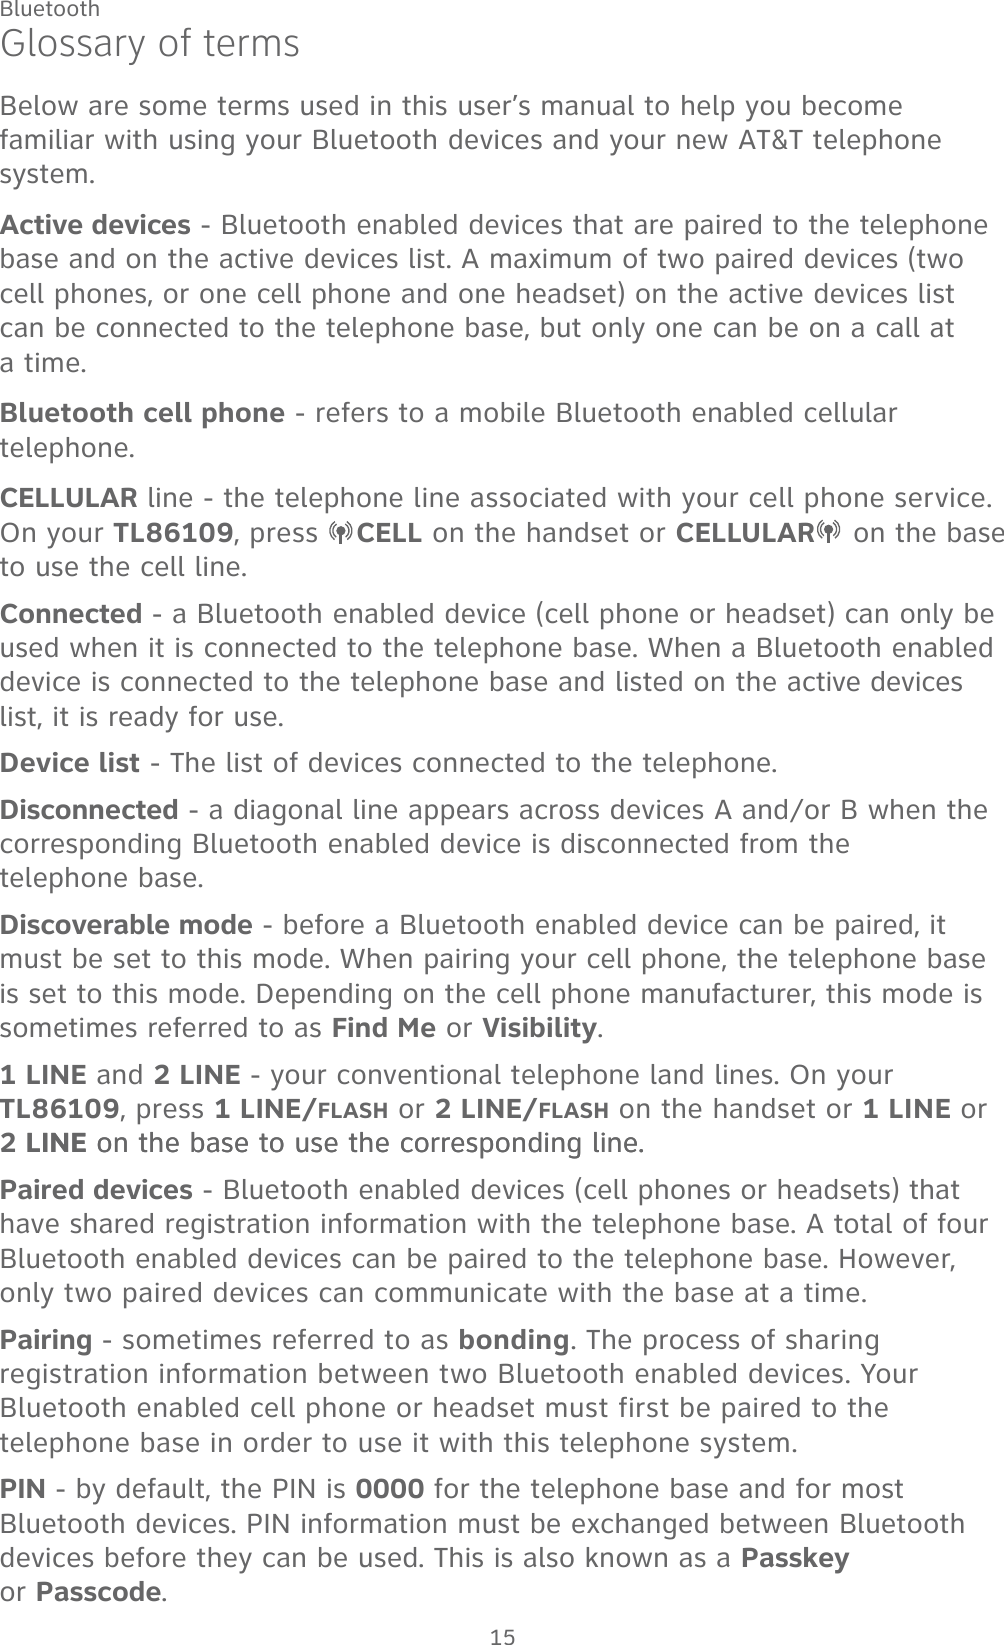 15BluetoothGlossary of termsBelow are some terms used in this user’s manual to help you become familiar with using your Bluetooth devices and your new AT&amp;T telephone system. Active devices - Bluetooth enabled devices that are paired to the telephone base and on the active devices list. A maximum of two paired devices (two cell phones, or one cell phone and one headset) on the active devices list can be connected to the telephone base, but only one can be on a call at  a time.Bluetooth cell phone - refers to a mobile Bluetooth enabled cellular telephone.CELLULAR line - the telephone line associated with your cell phone service. On your TL86109, press  CELL on the handset or CELLULAR  on the base to use the cell line.Connected - a Bluetooth enabled device (cell phone or headset) can only be used when it is connected to the telephone base. When a Bluetooth enabled device is connected to the telephone base and listed on the active devices list, it is ready for use.Device list - The list of devices connected to the telephone.Disconnected - a diagonal line appears across devices A and/or B when the corresponding Bluetooth enabled device is disconnected from the  telephone base.Discoverable mode - before a Bluetooth enabled device can be paired, it must be set to this mode. When pairing your cell phone, the telephone base is set to this mode. Depending on the cell phone manufacturer, this mode is sometimes referred to as Find Me or Visibility.1 LINE and 2 LINE - your conventional telephone land lines. On your TL86109, press 1 LINE/FLASH or 2 LINE/FLASH on the handset or 1 LINE or 2 LINELINE on the base to use the corresponding line.on the base to use the corresponding line.Paired devices - Bluetooth enabled devices (cell phones or headsets) that have shared registration information with the telephone base. A total of four Bluetooth enabled devices can be paired to the telephone base. However, only two paired devices can communicate with the base at a time.Pairing - sometimes referred to as bonding. The process of sharing registration information between two Bluetooth enabled devices. Your Bluetooth enabled cell phone or headset must first be paired to the telephone base in order to use it with this telephone system.PIN - by default, the PIN is 0000 for the telephone base and for most Bluetooth devices. PIN information must be exchanged between Bluetooth devices before they can be used. This is also known as a Passkey  or Passcode.